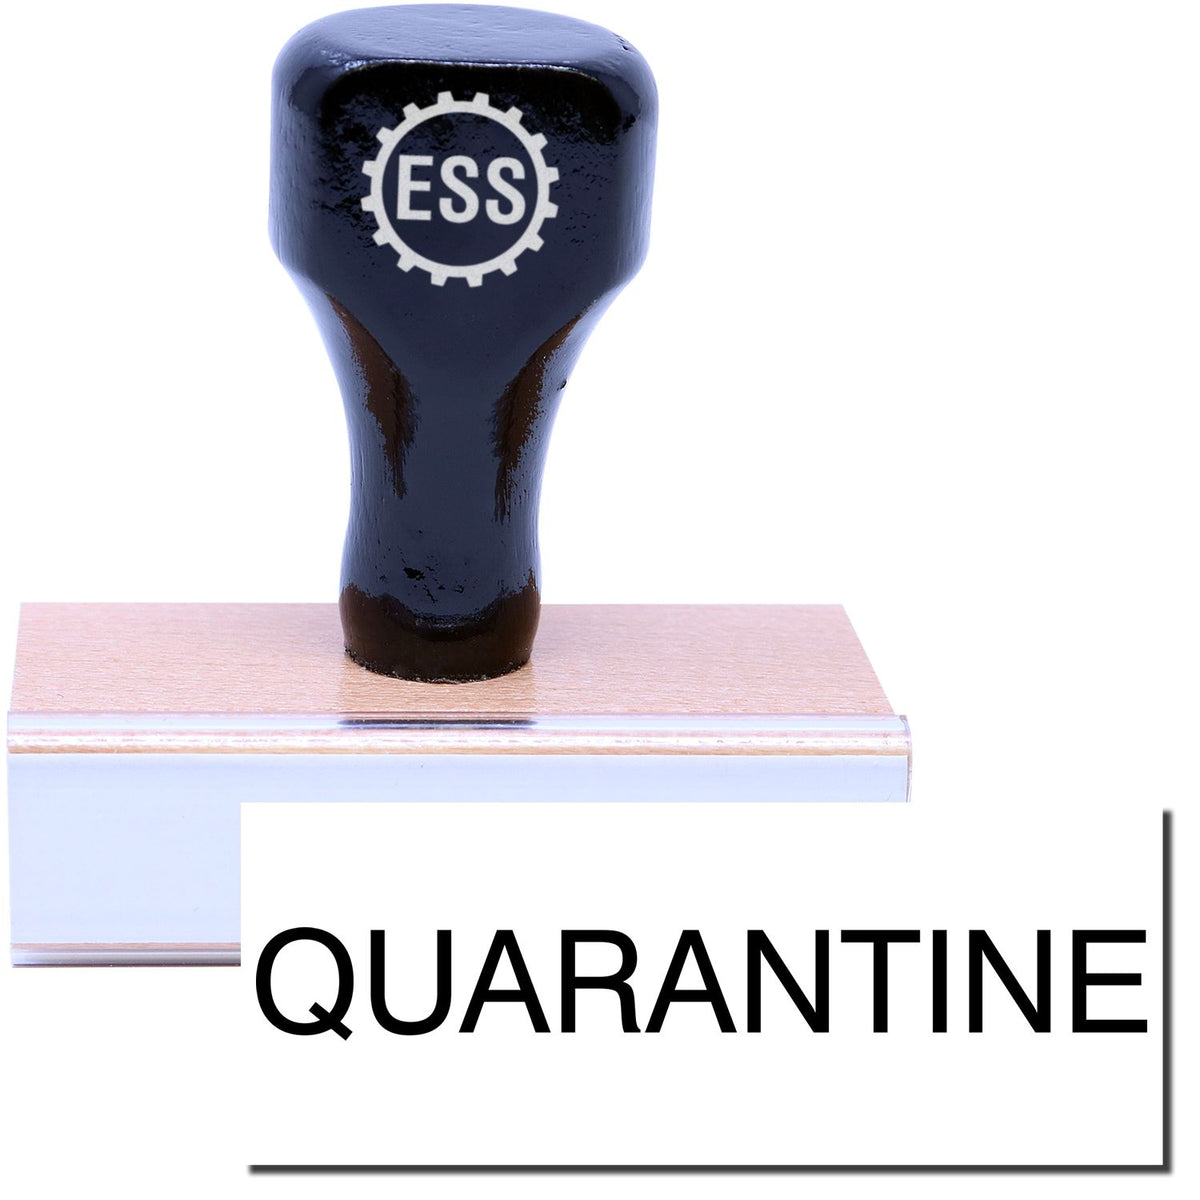 A stock office rubber stamp with a stamped image showing how the text &quot;QUARANTINE&quot; in a large font is displayed after stamping.